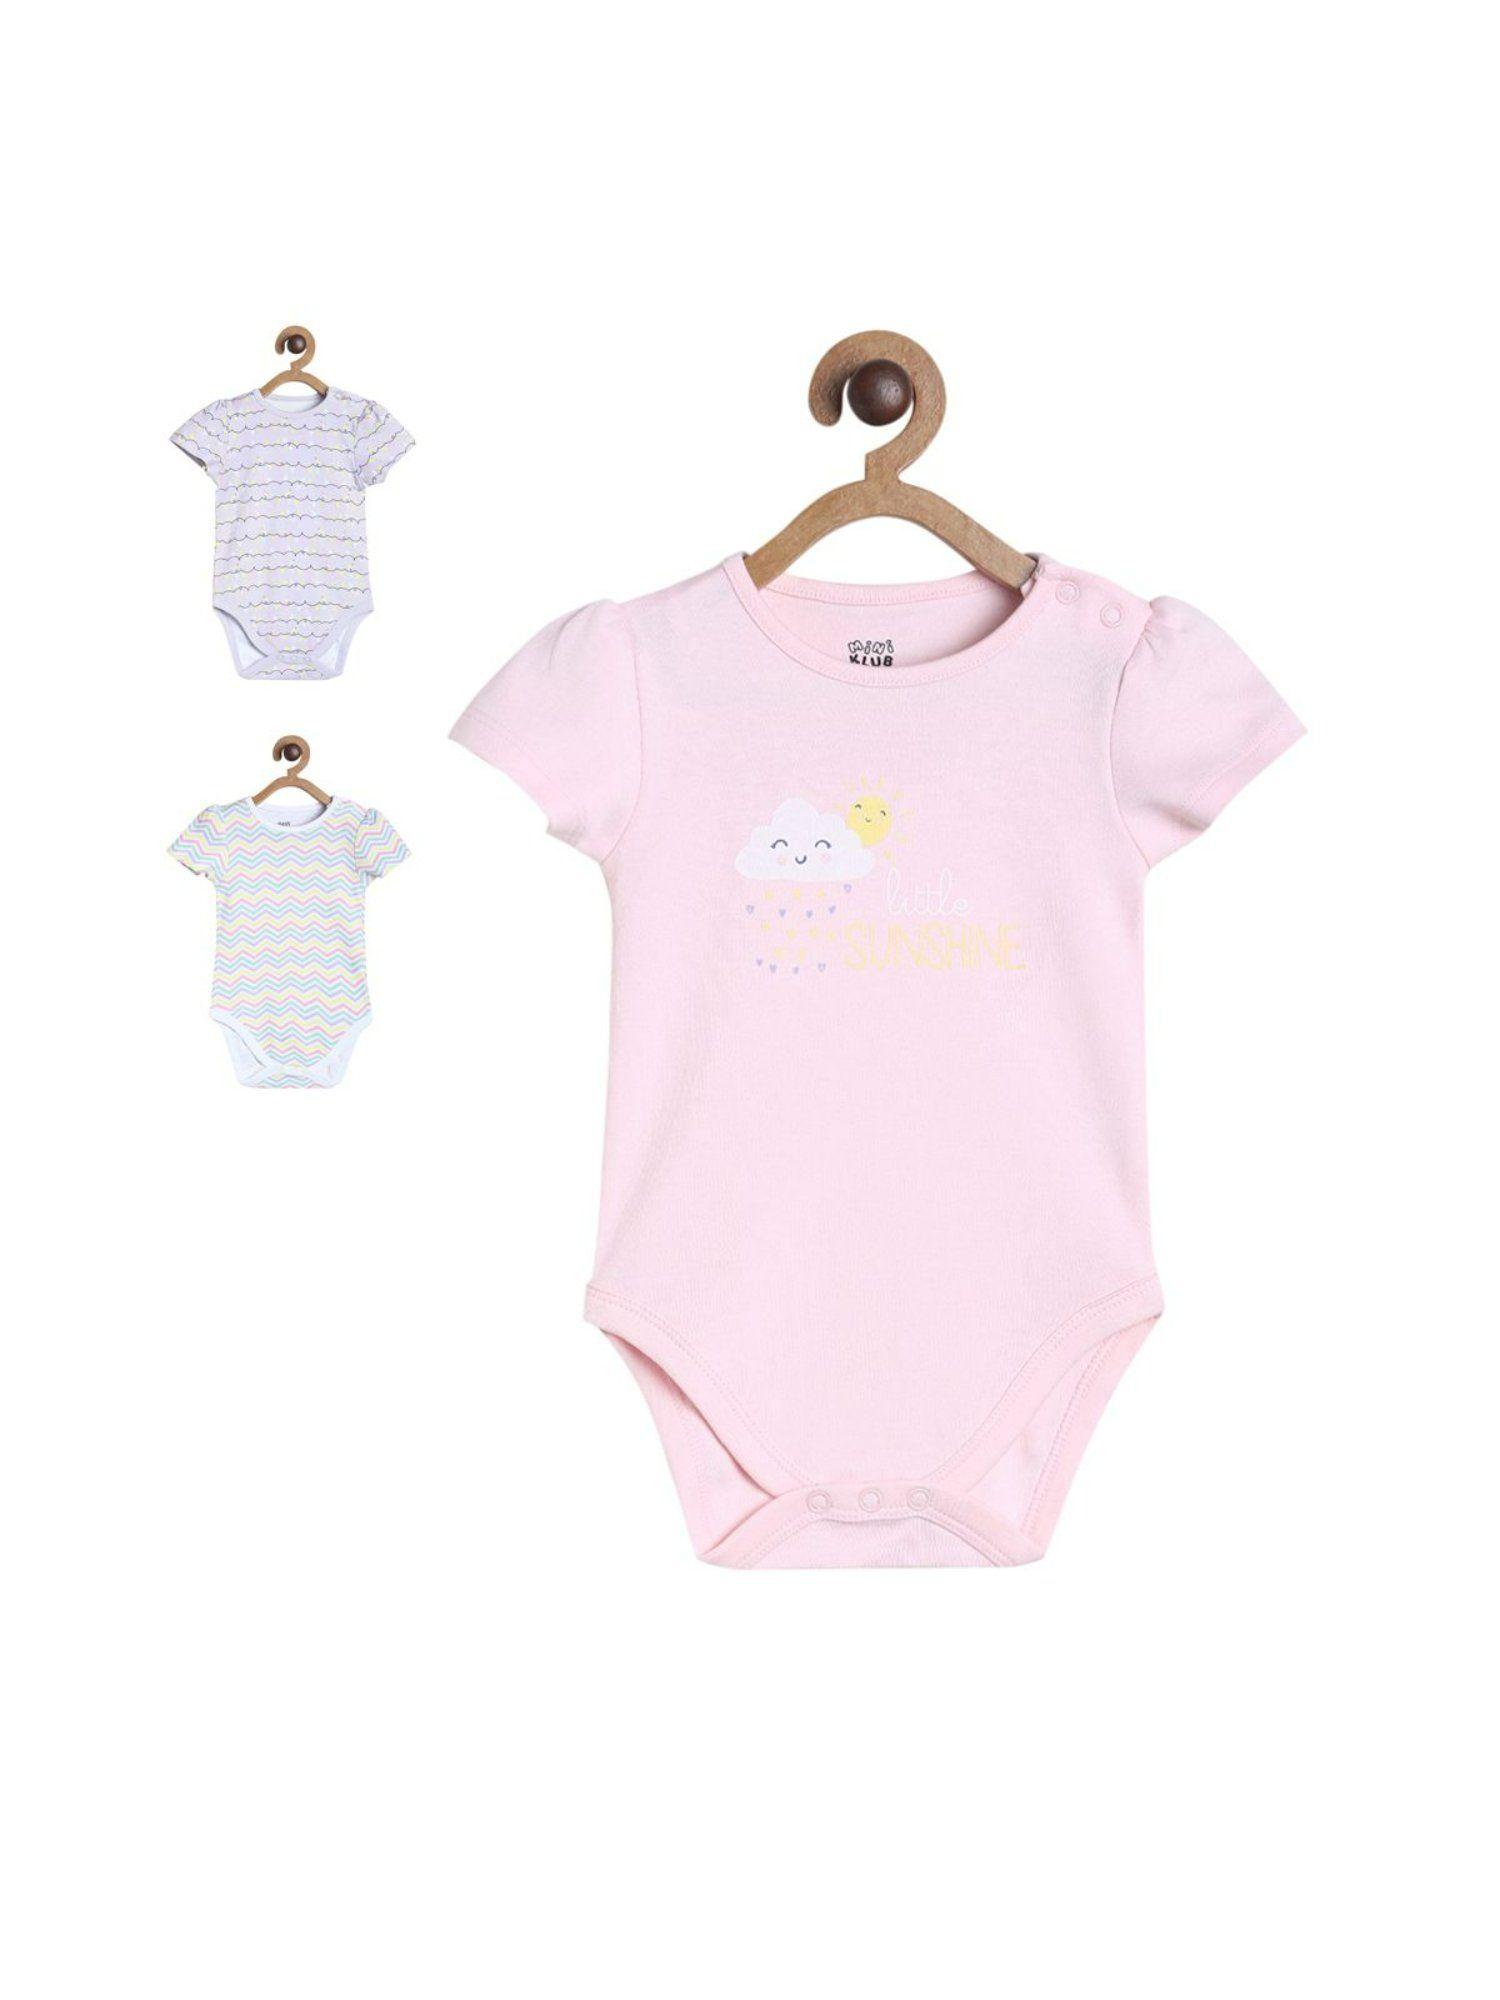 girls-multi-color-bodysuits-(pack-of-3)